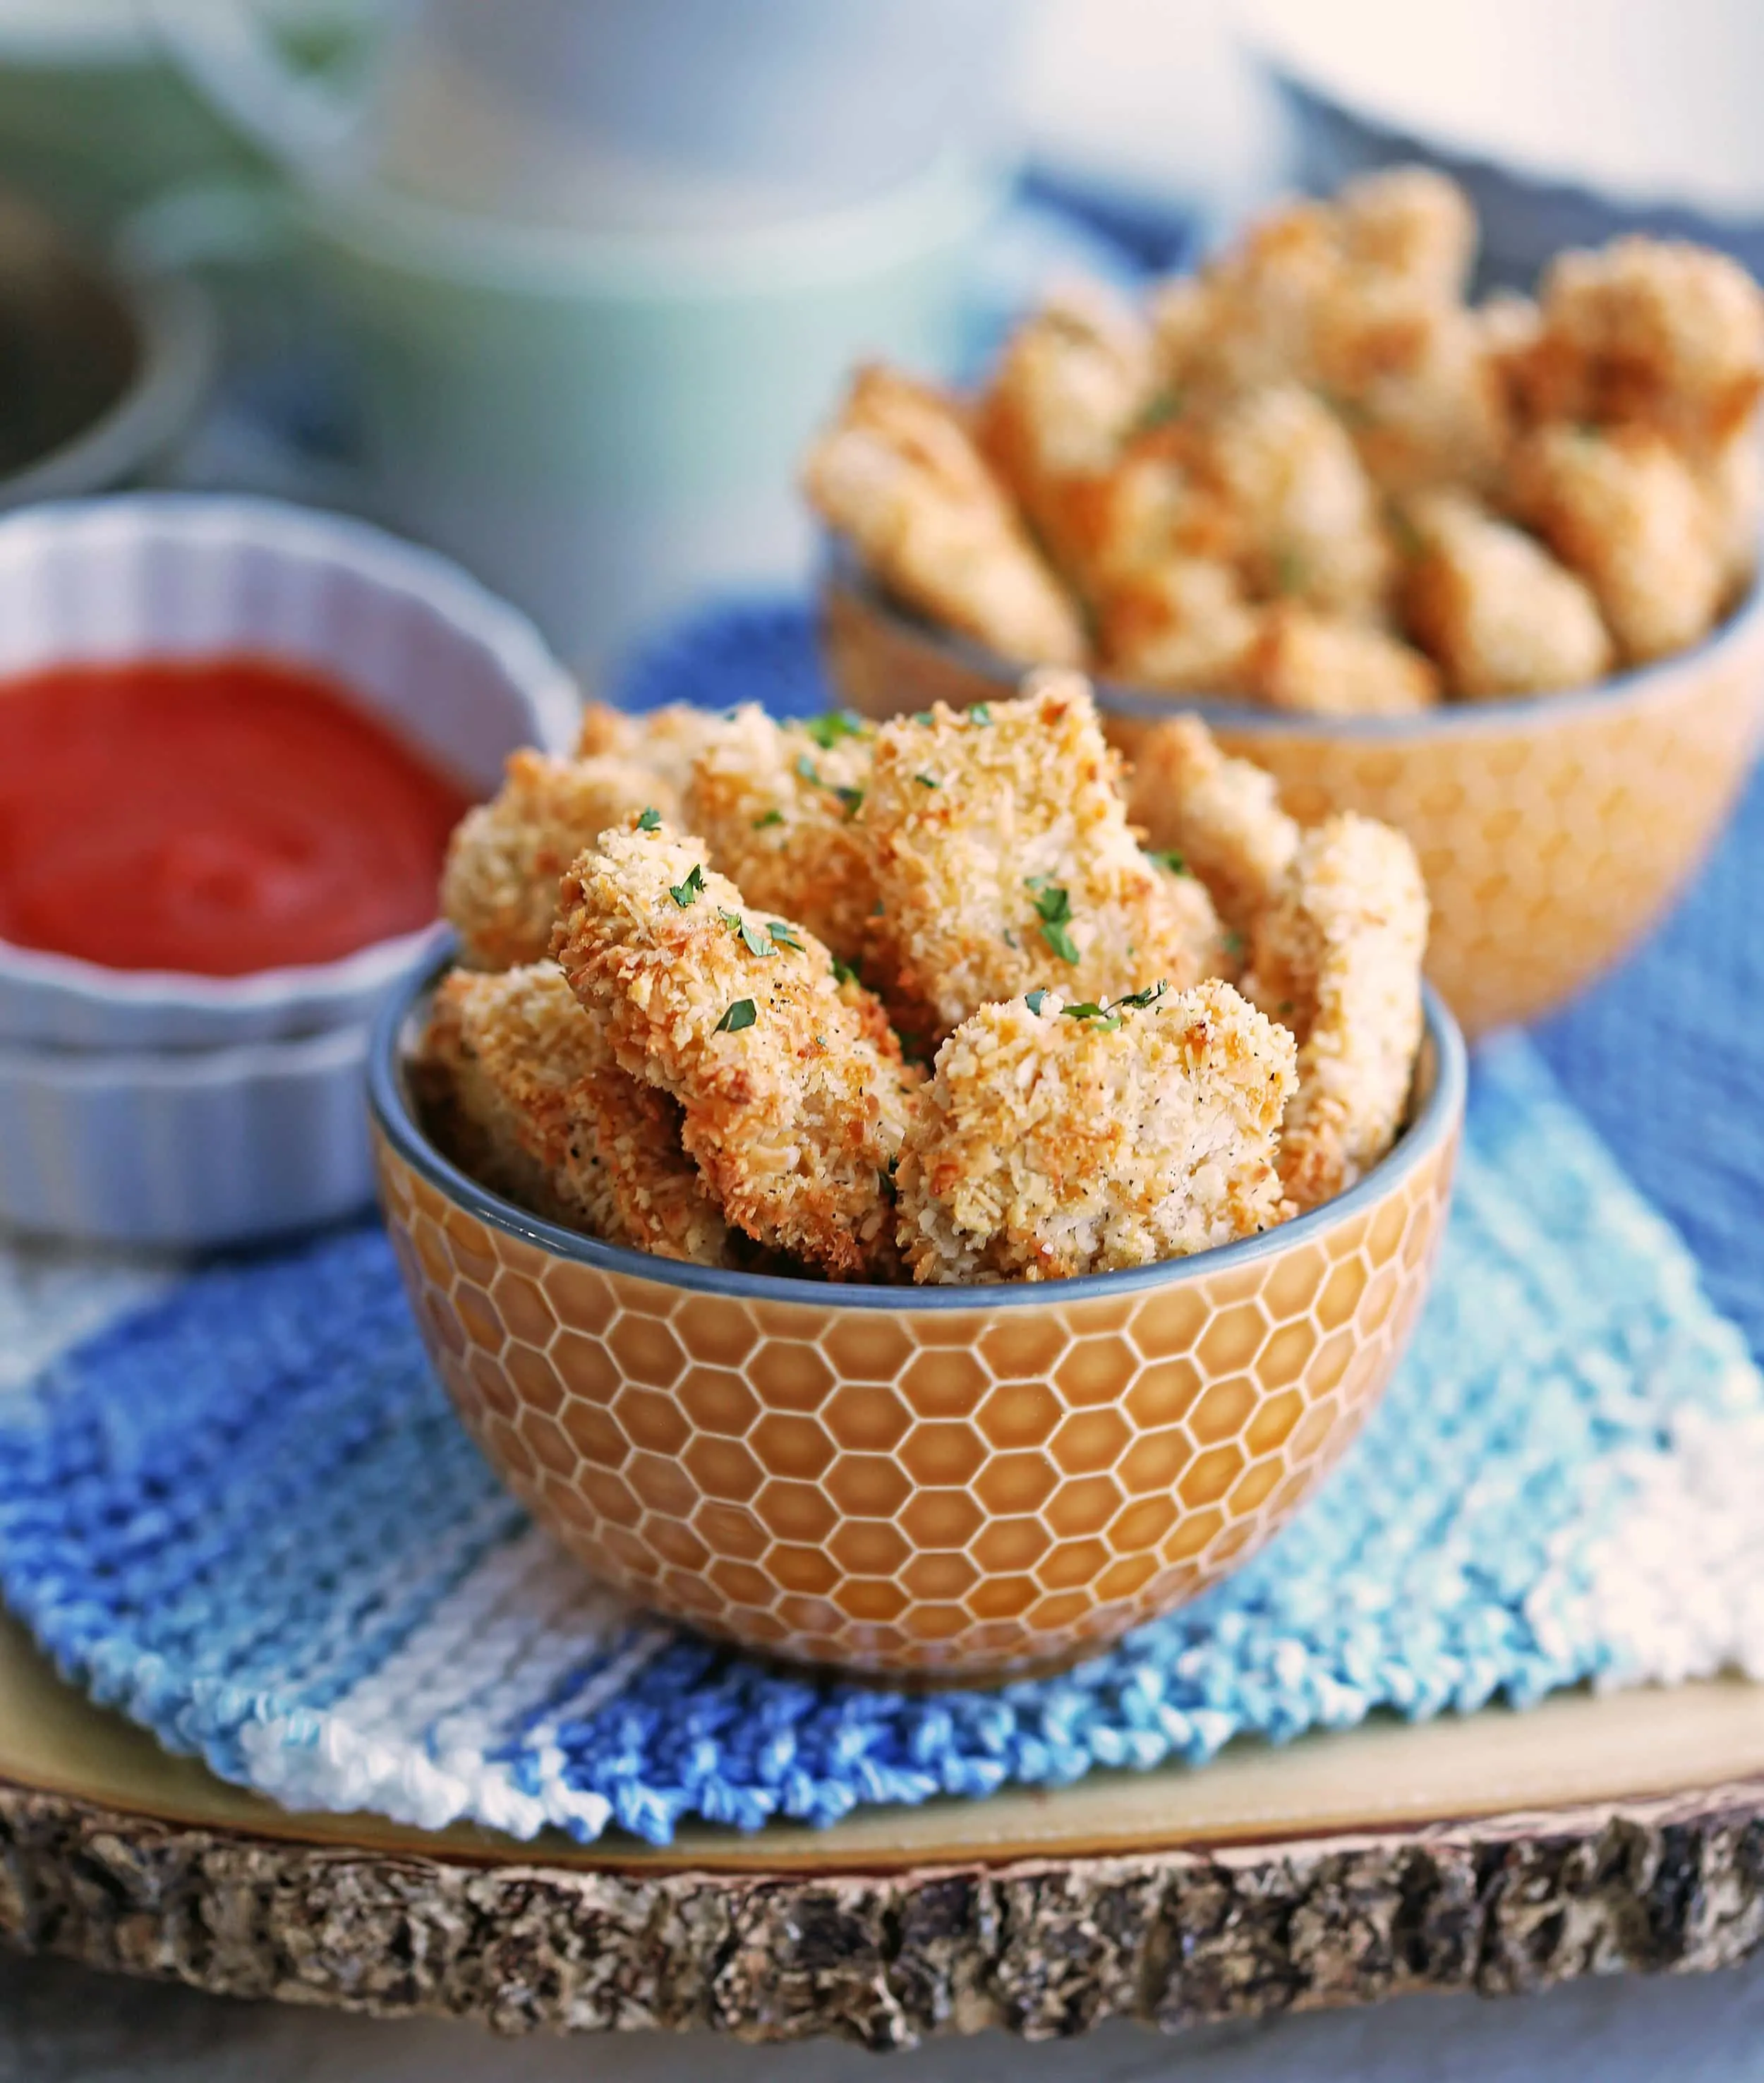 Baked crispy coconut chicken nuggets in an orange bowl with more chicken bites and red sauce in the background.